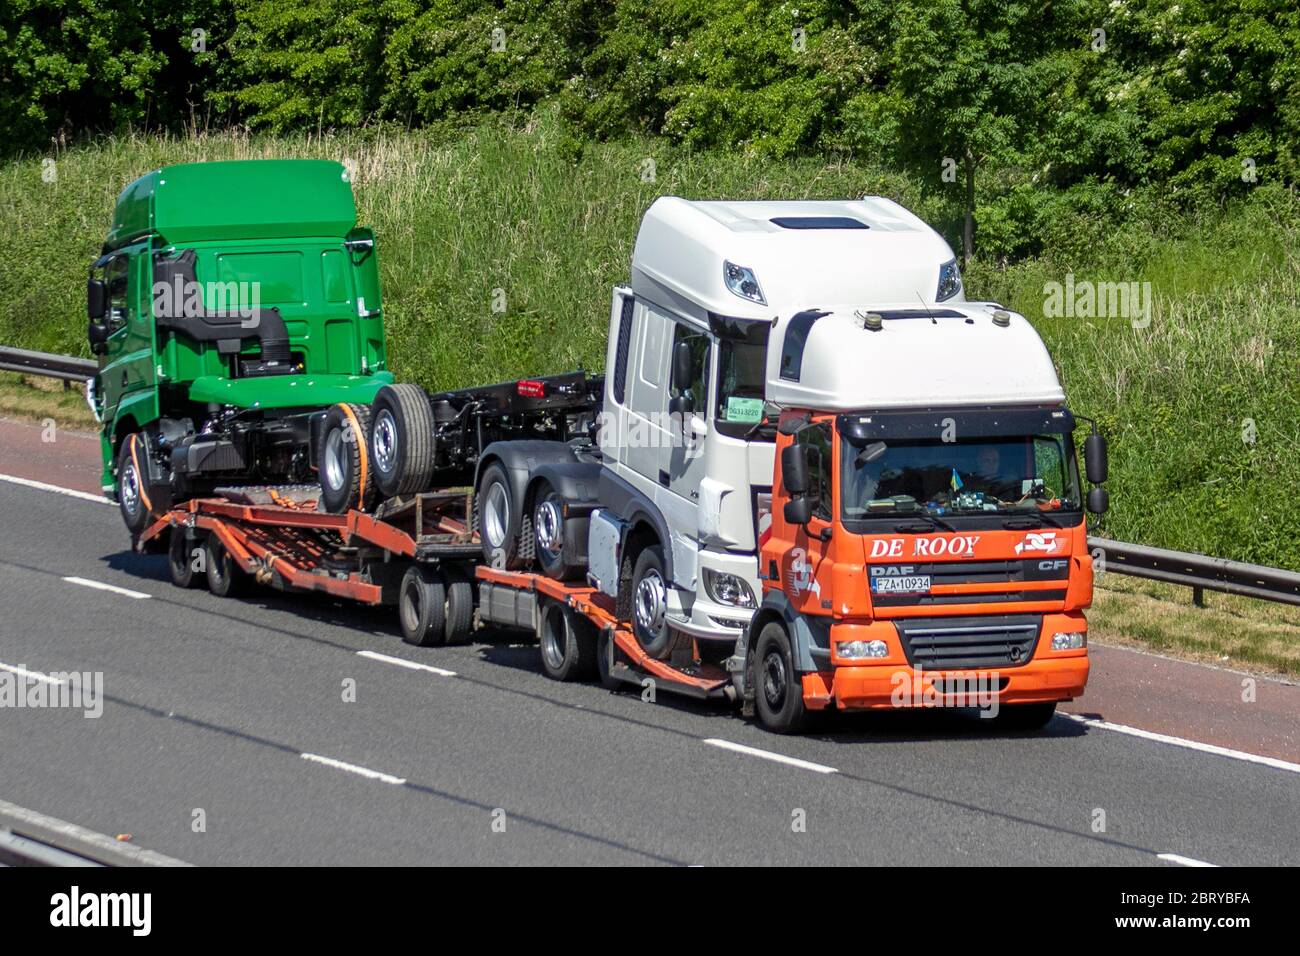 De Rooy Leyland Haulage delivery trucks, lorry, transportation, truck, cargo carrier, new DAF vehicle, European commercial transport, industry, M61 at Manchester, UK Stock Photo